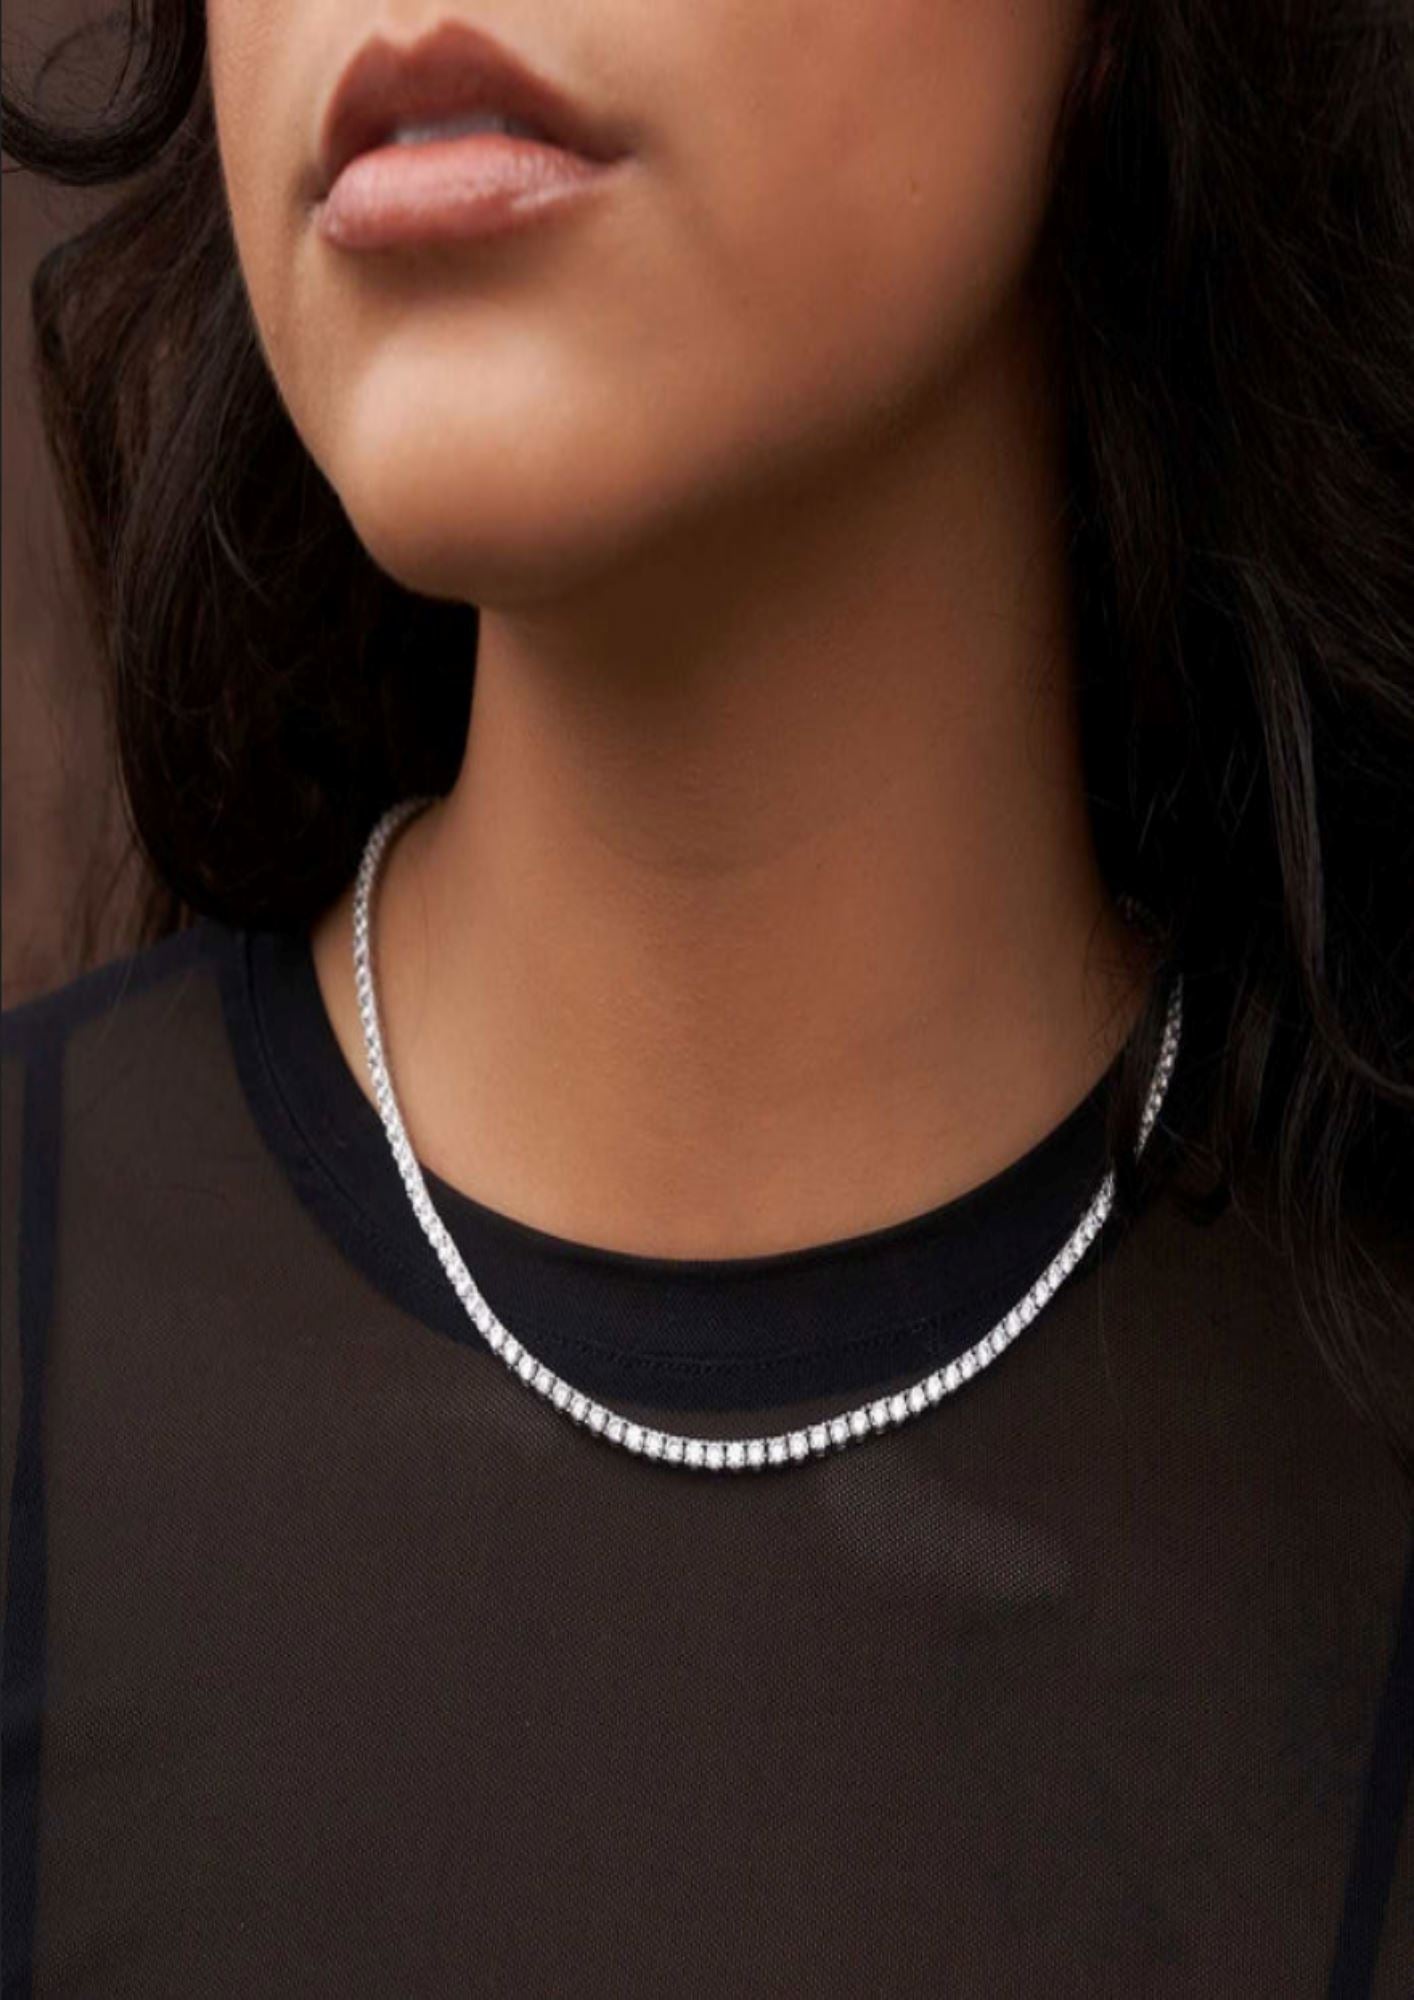 TENNIS NECKLACE - SILVER ring Yubama Jewelry Online Store - The Elegant Designs of Gold and Silver ! 